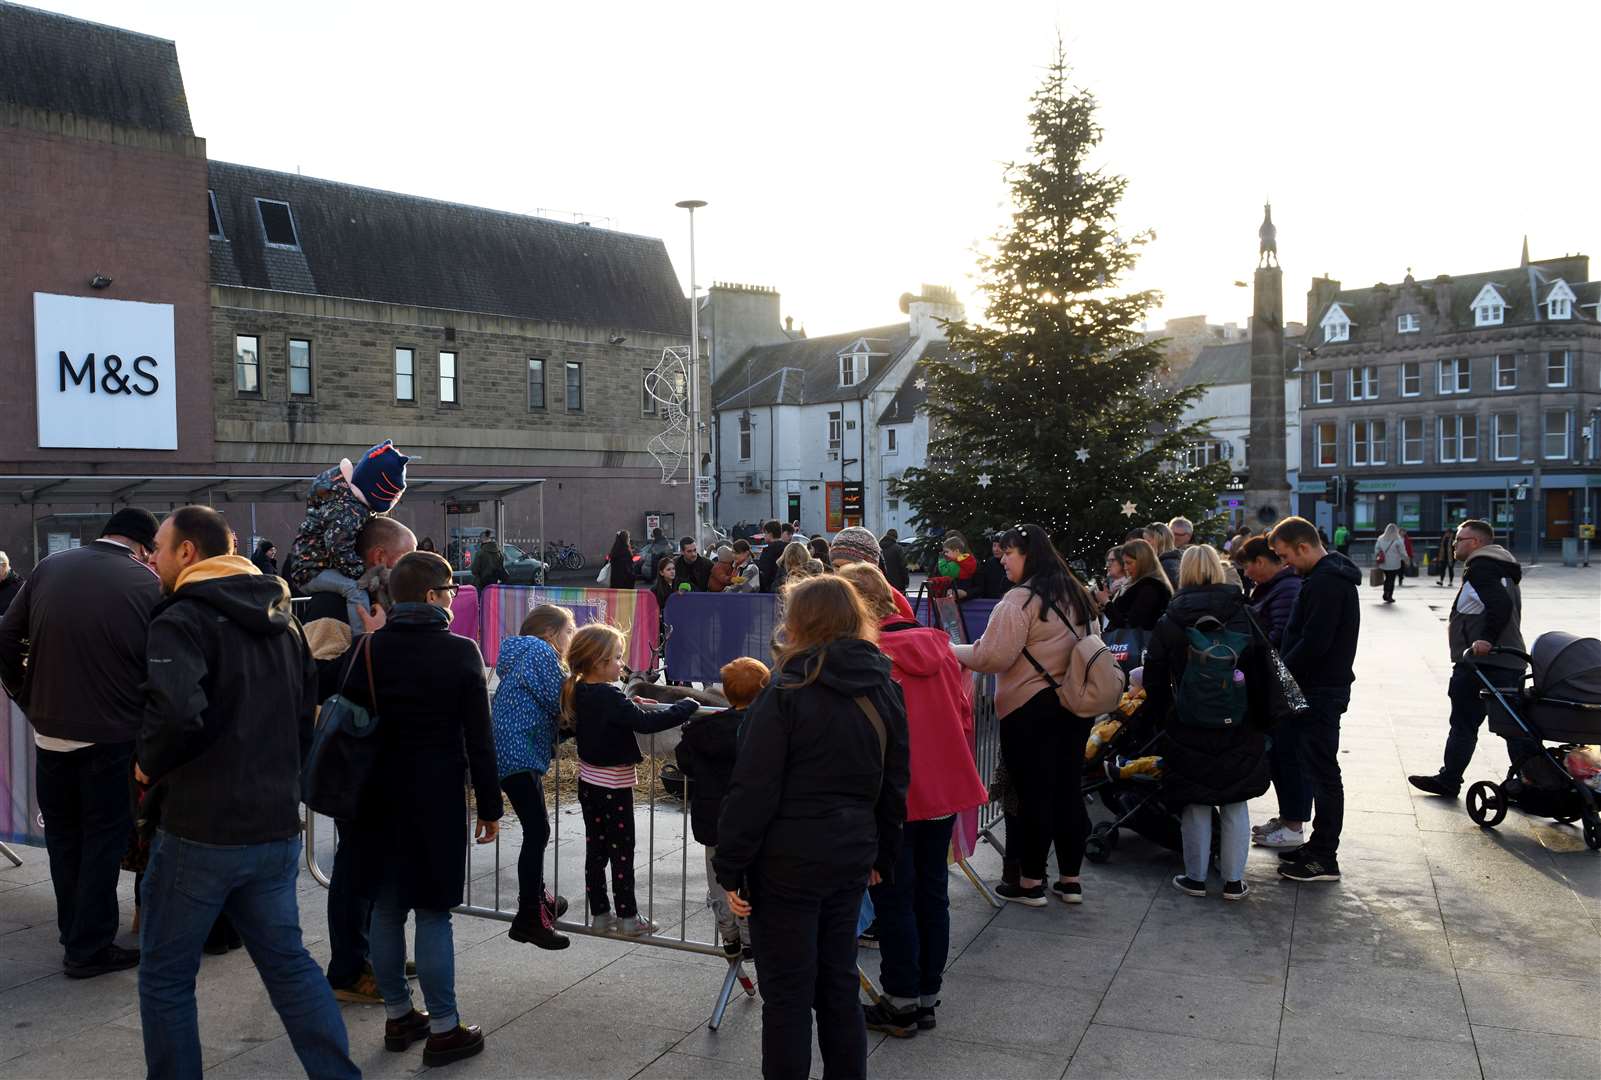 People gathered to see the reindeer in Falcon Square. Picture: James Mackenzie